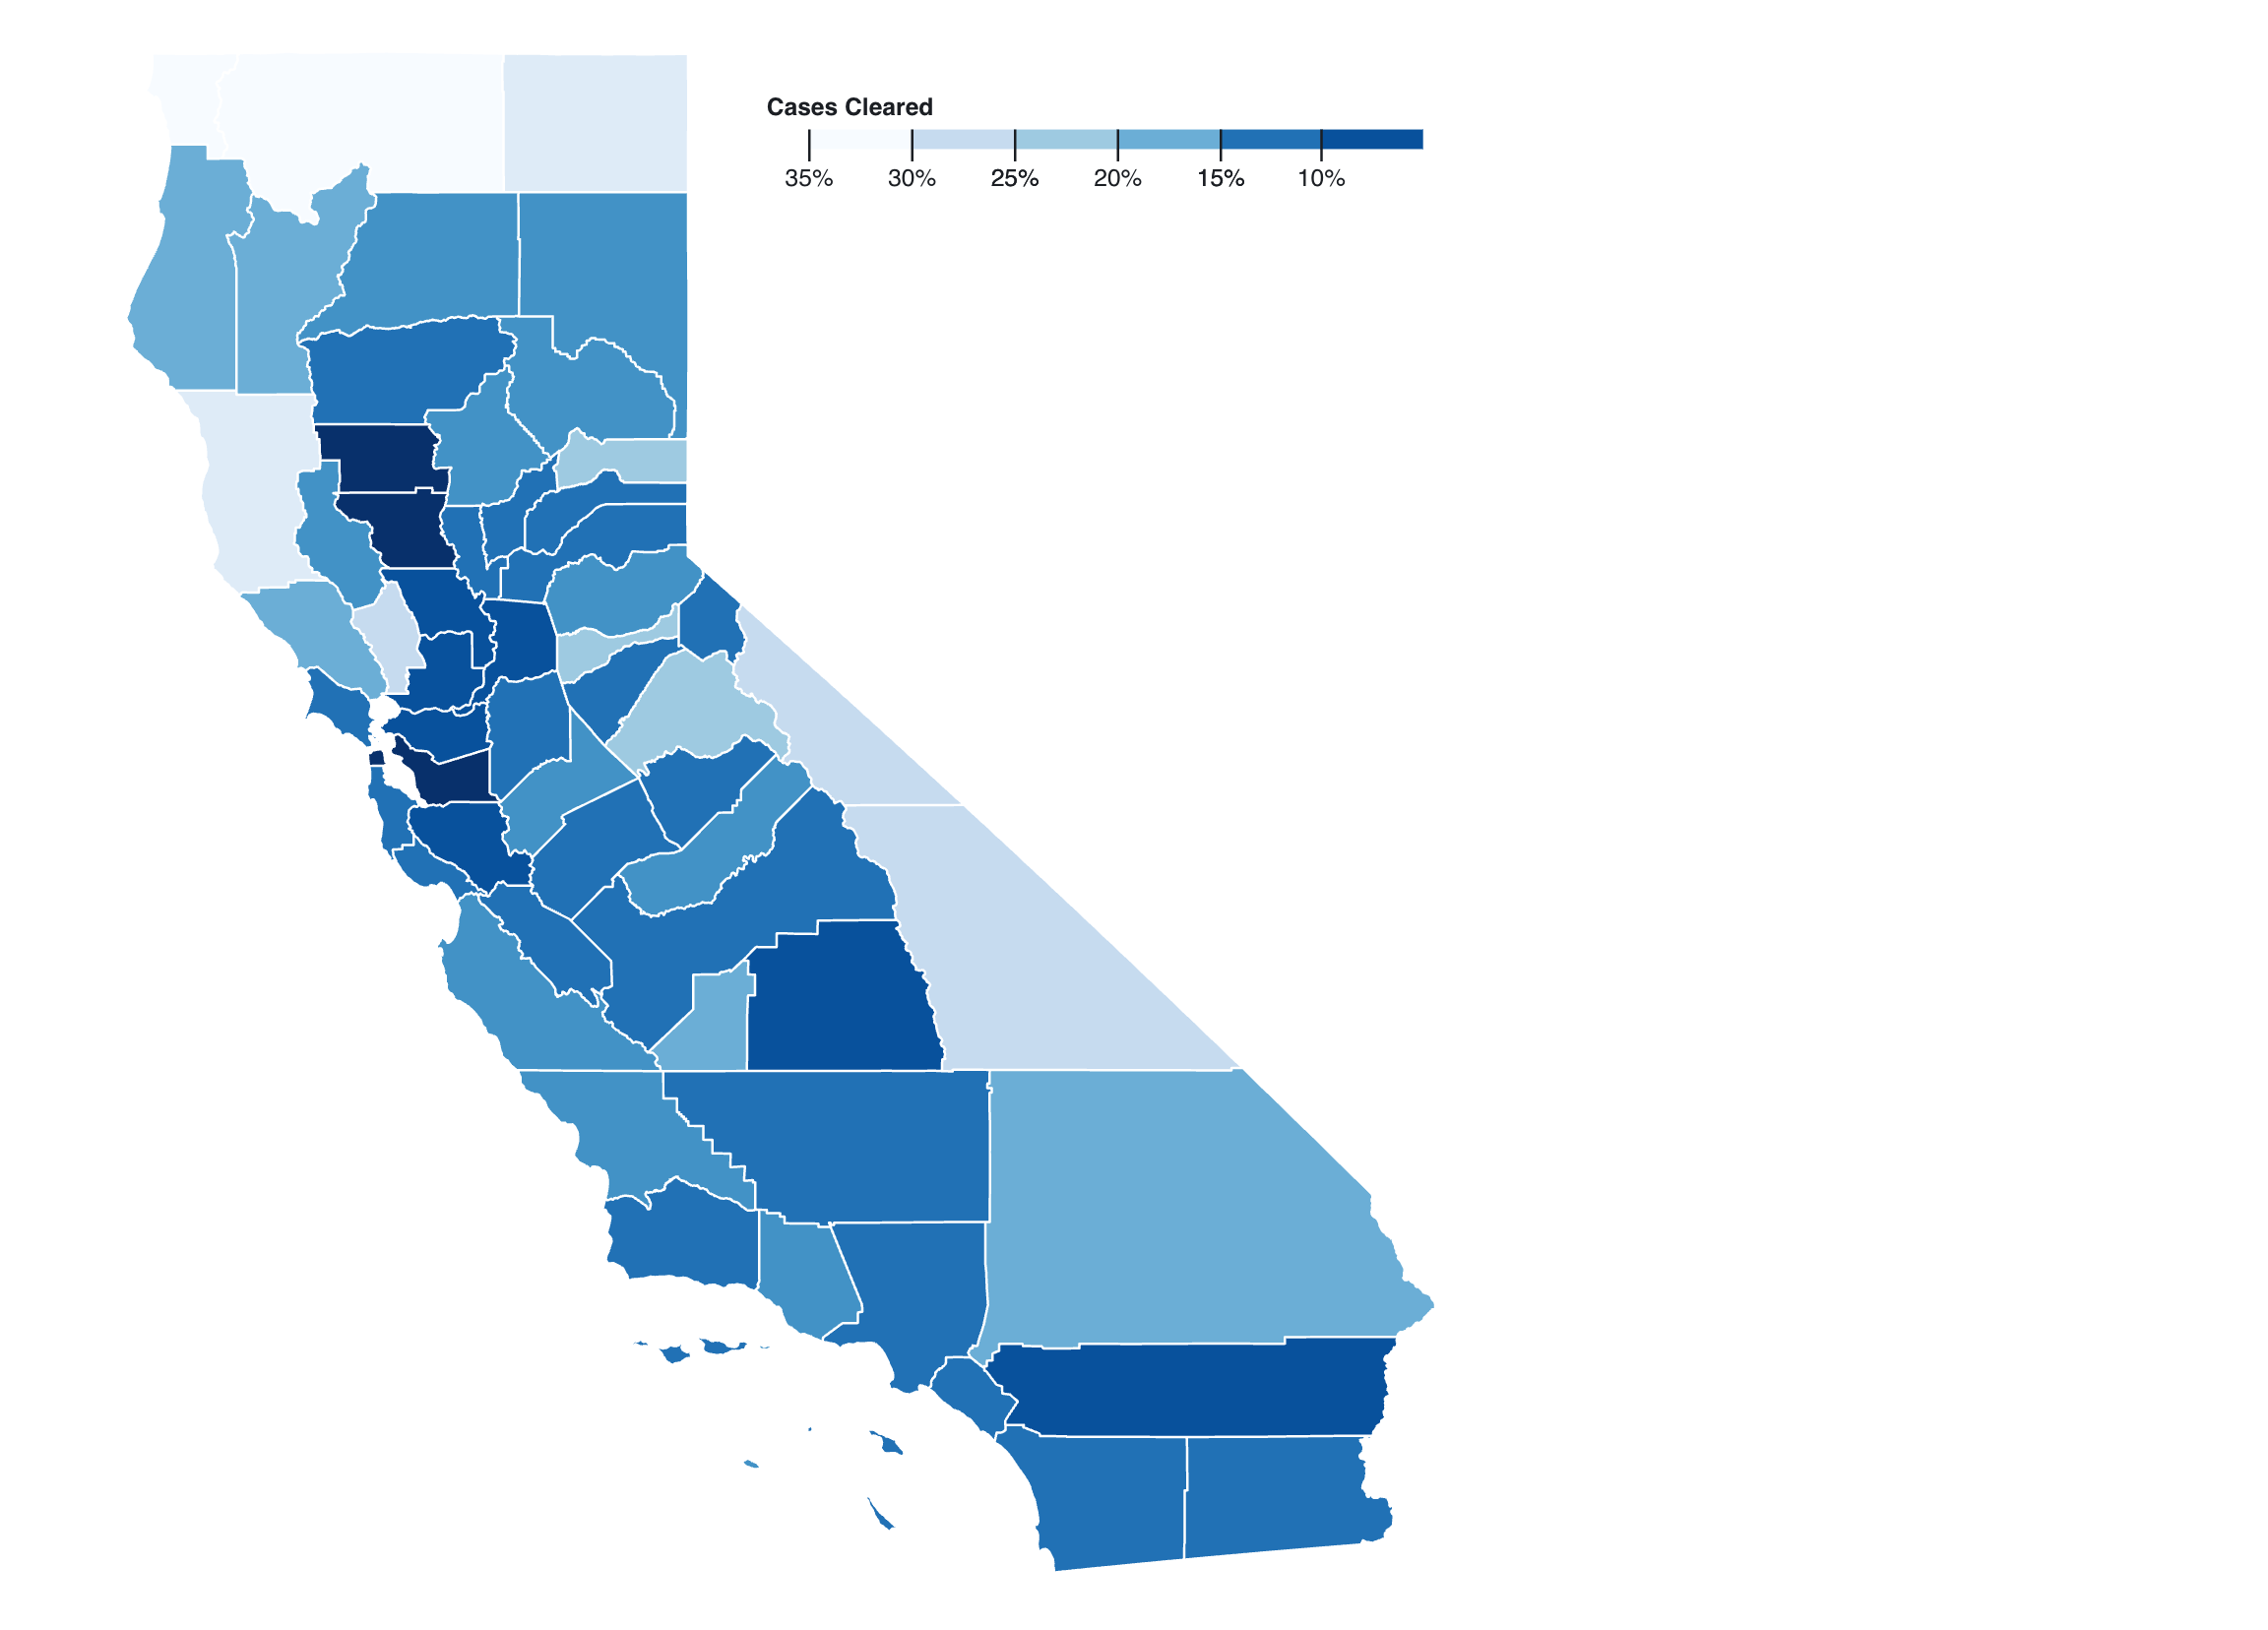 this is a picture of a map of California showing clerance rates by county